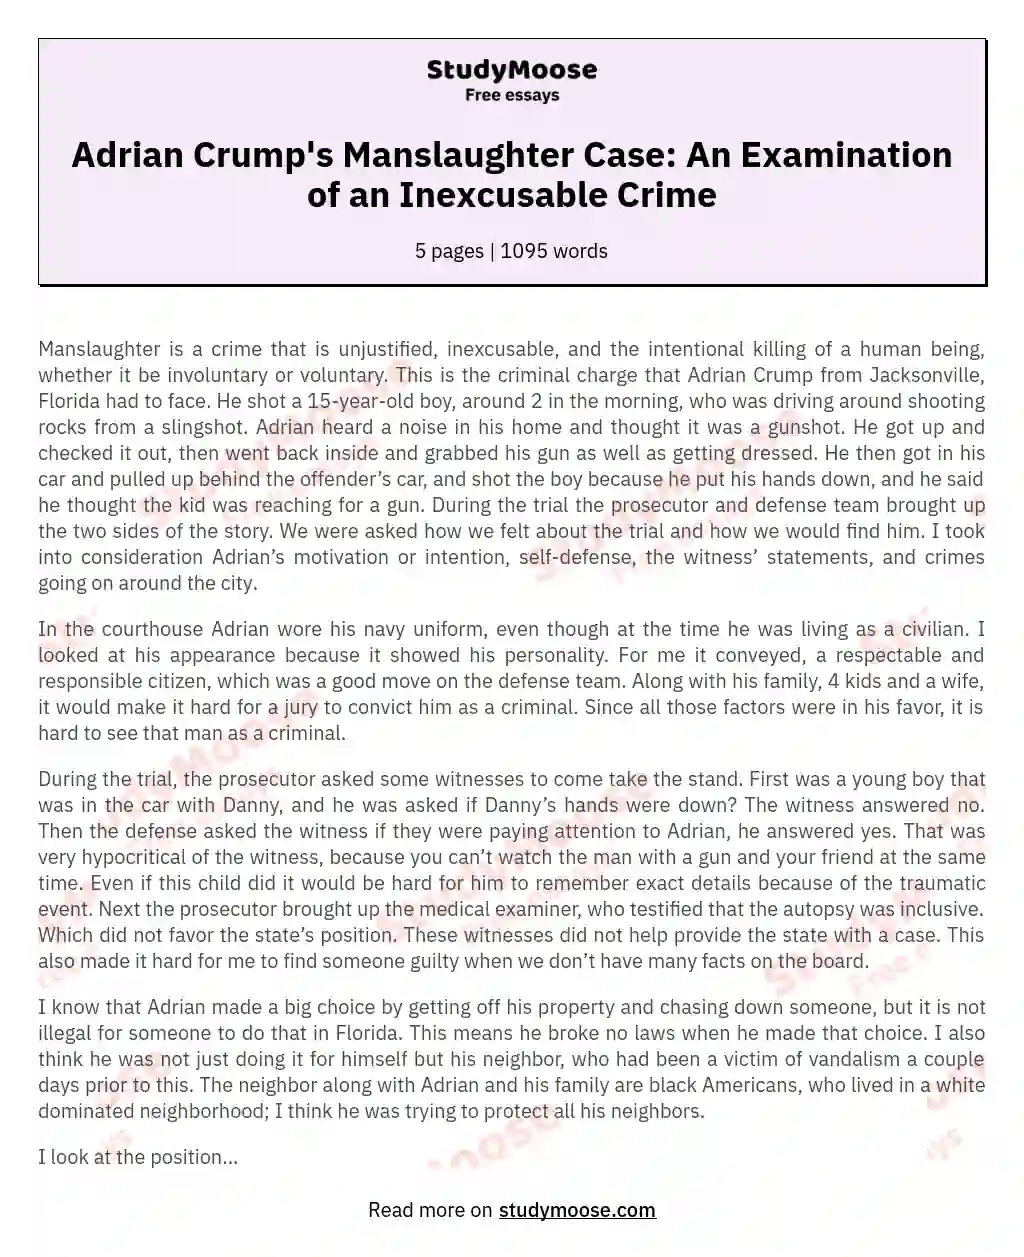 Adrian Crump's Manslaughter Case: An Examination of an Inexcusable Crime essay